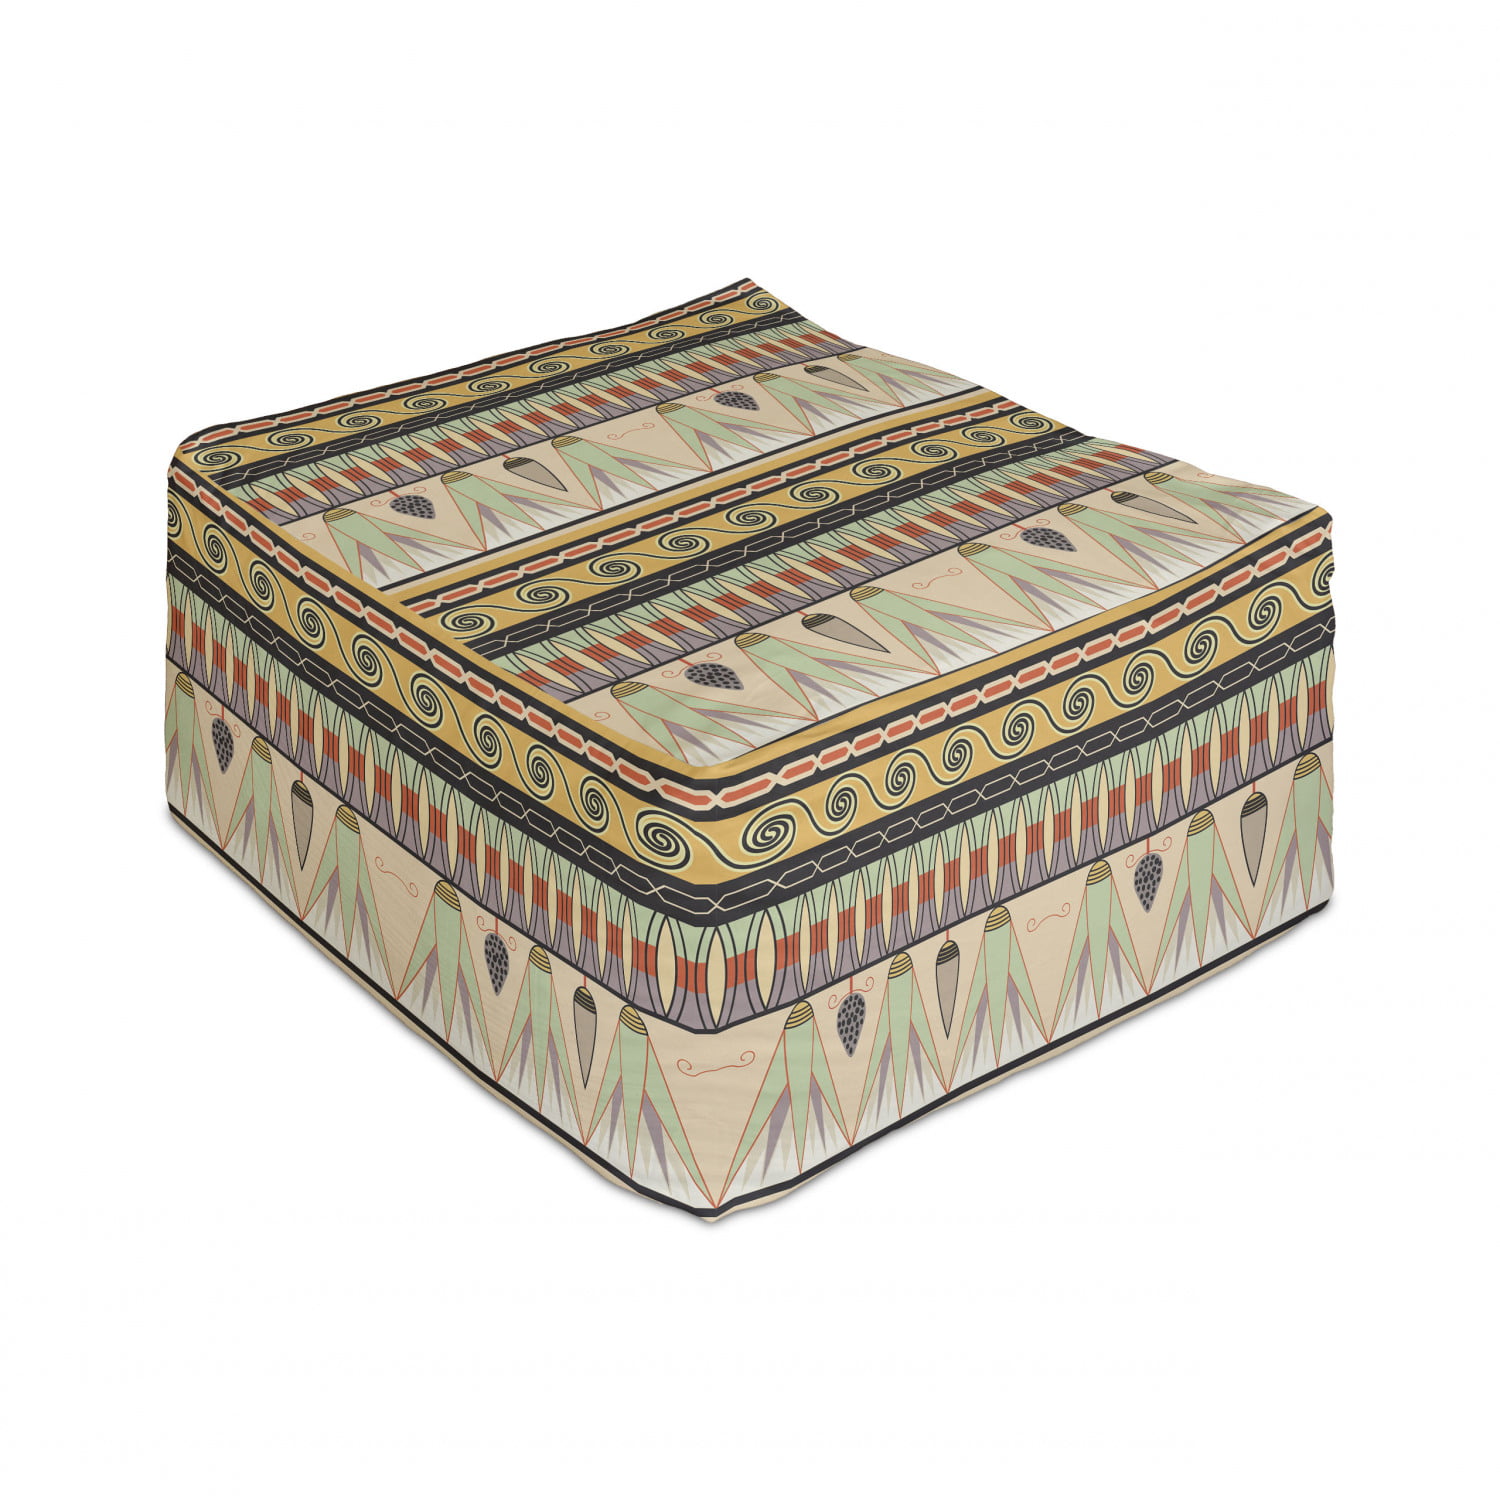 Ambesonne Colorful Rectangle Pouf 25 Under Desk Foot Stool for Living Room Office Ottoman with Cover Quirky Shapes Geometrical Theme with Abstract Illustration in Grunge Style Multicolor